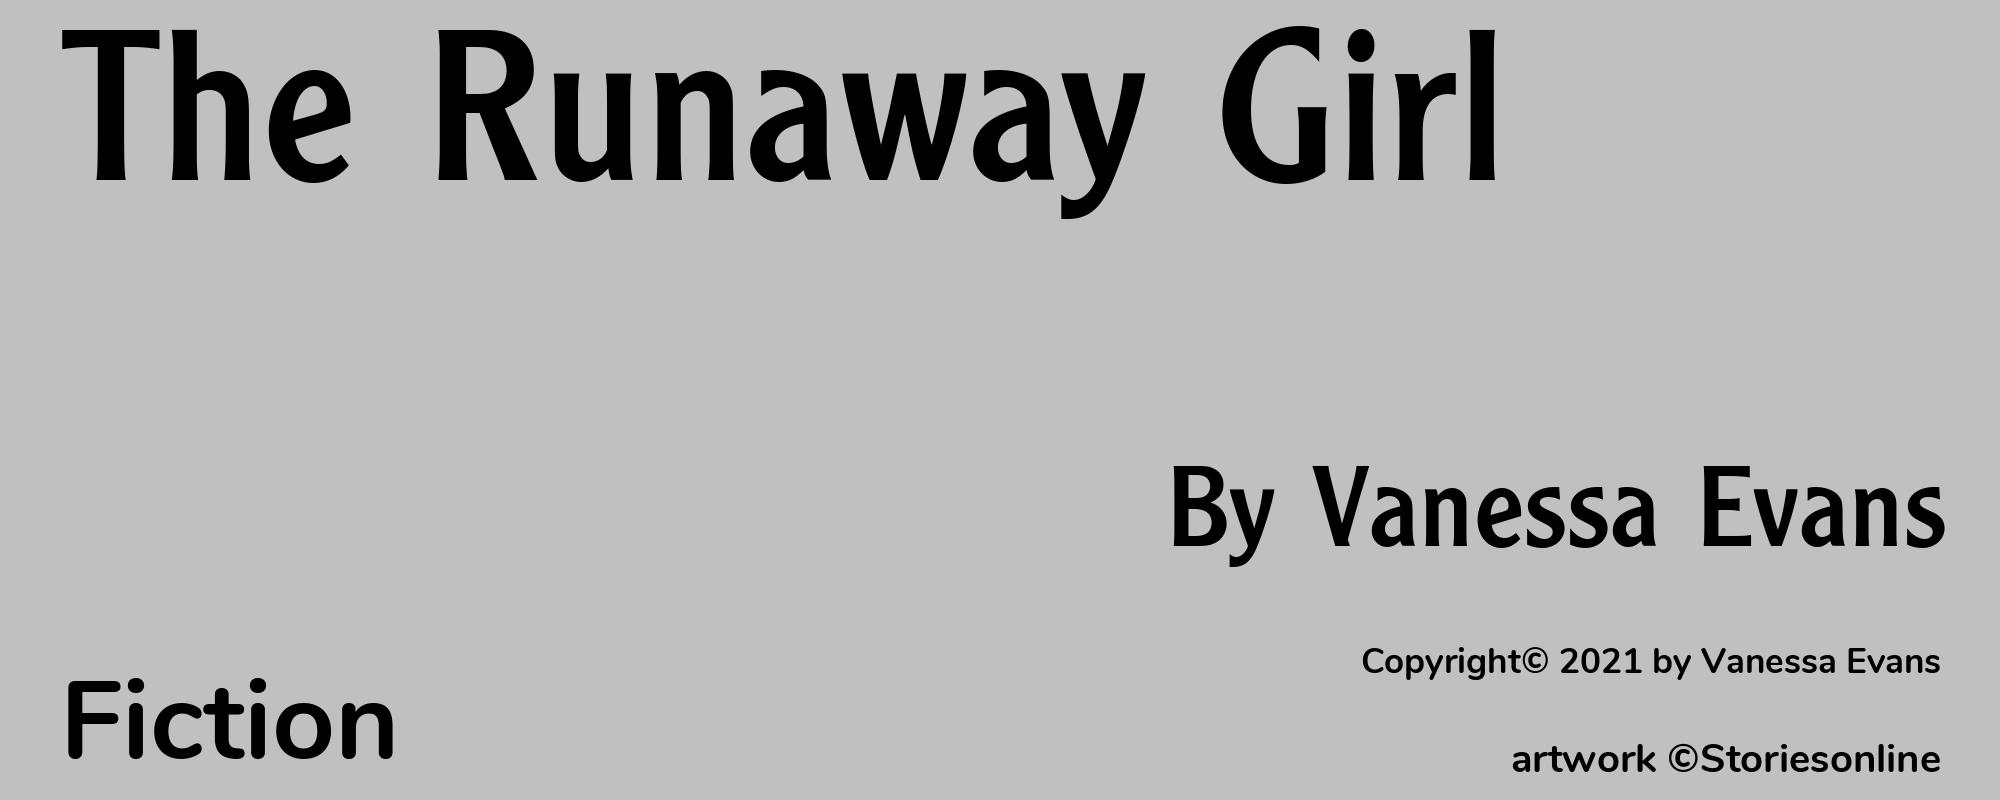 The Runaway Girl - Cover